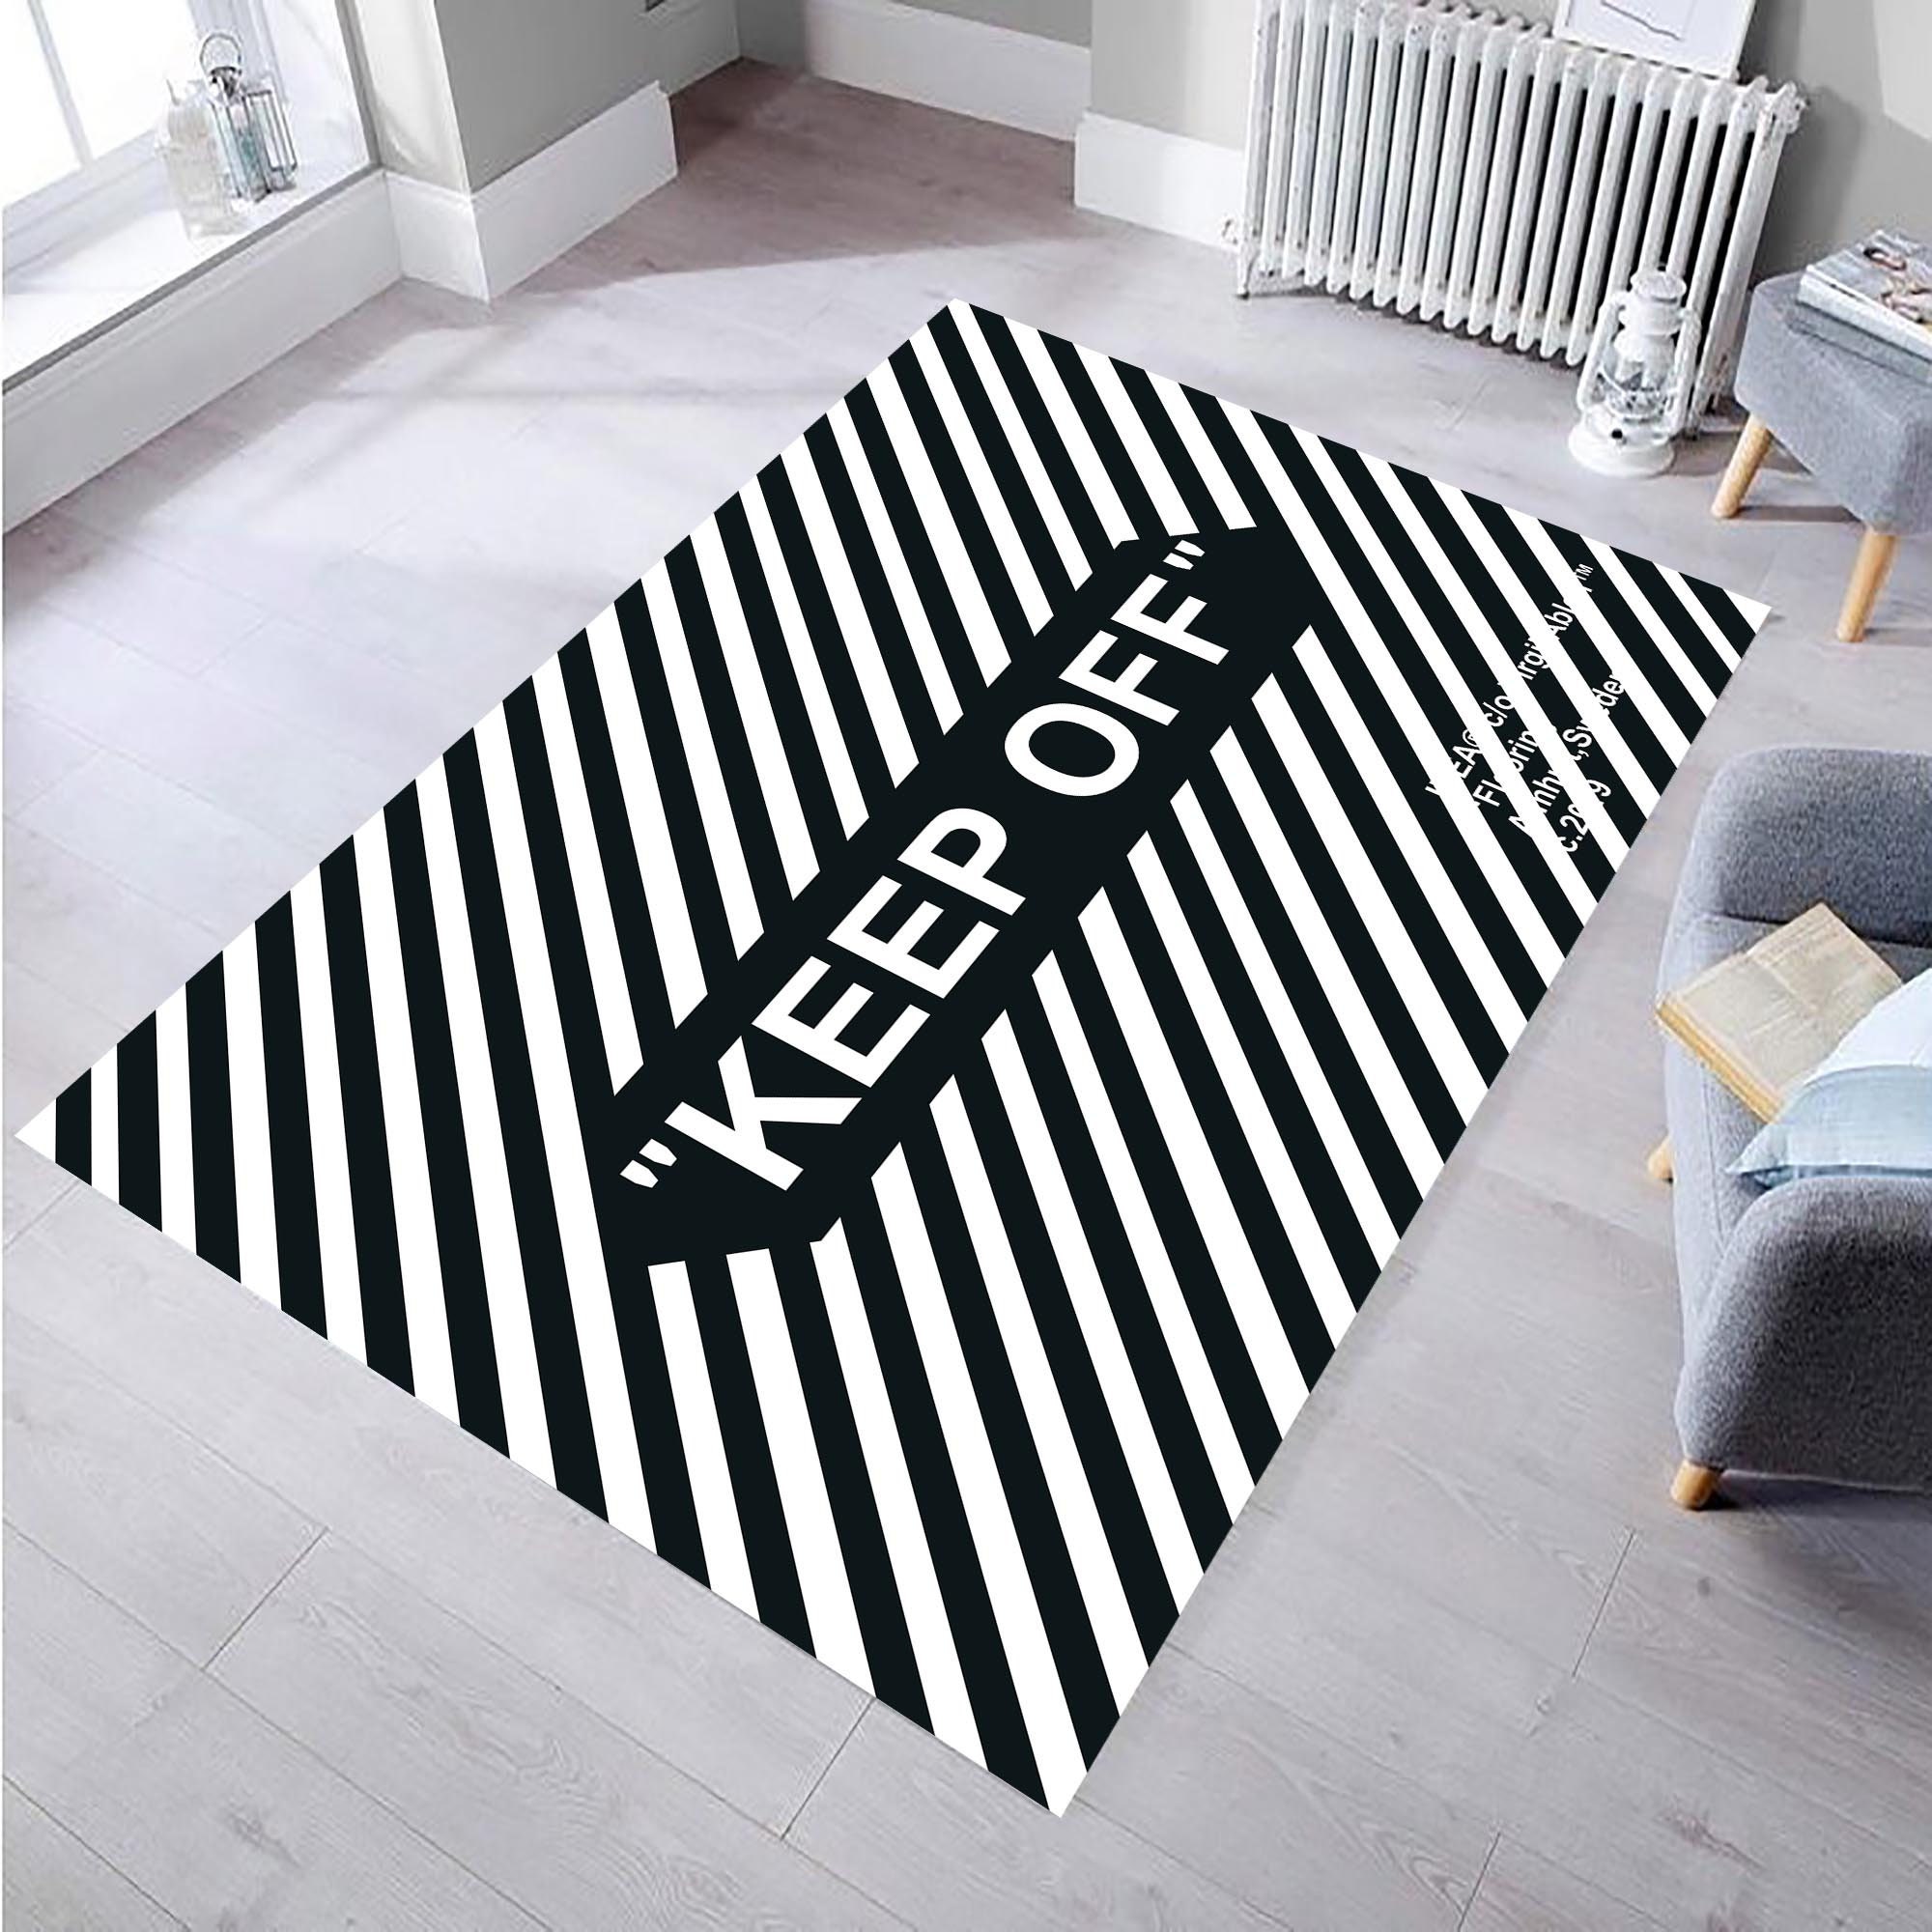 KEEP OFF Area Rugs Floor Mat Black and White Carpet Living Room